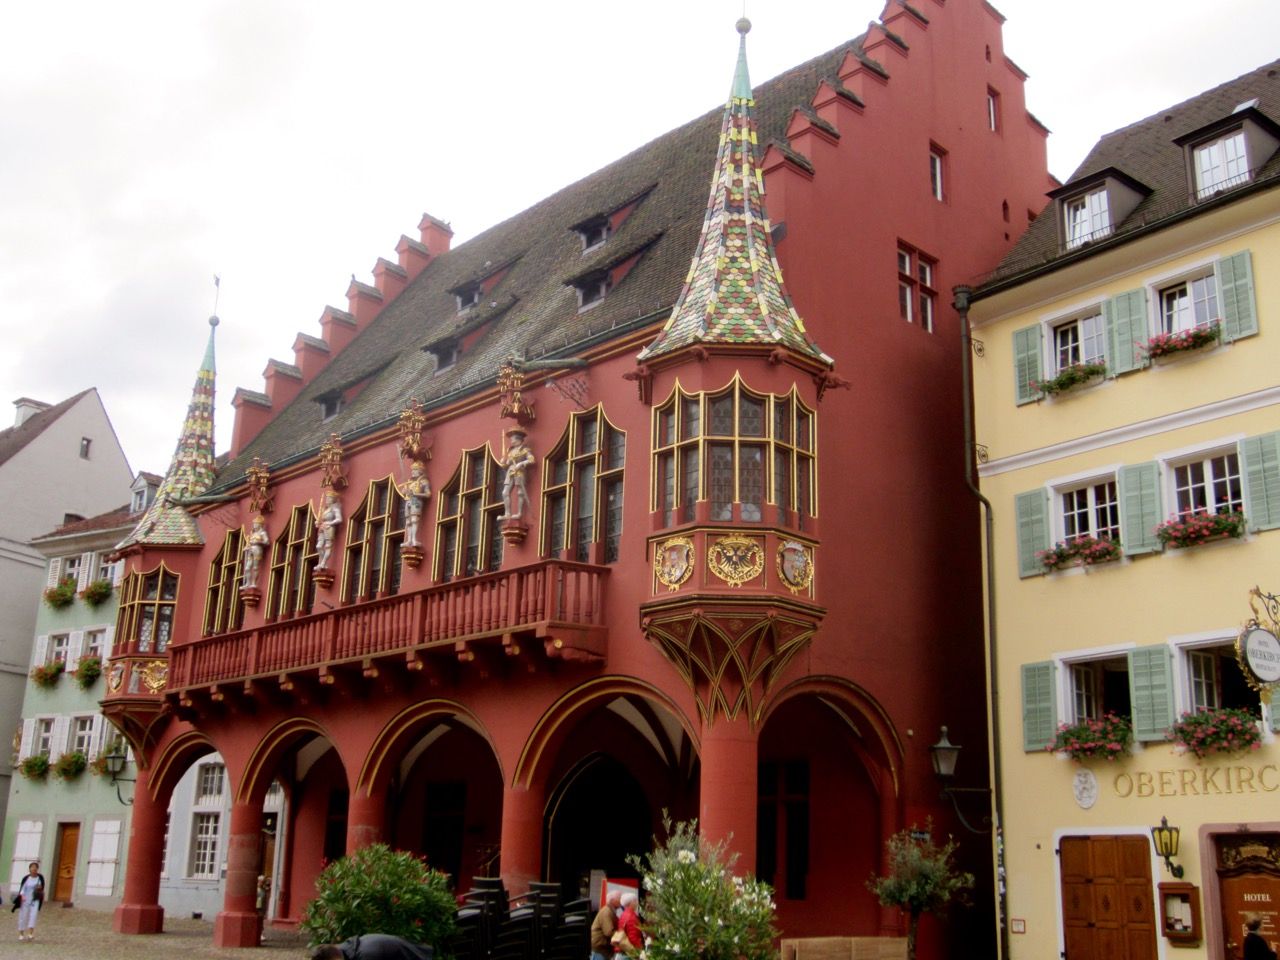 A red building in the tradition of 13th century Germany.